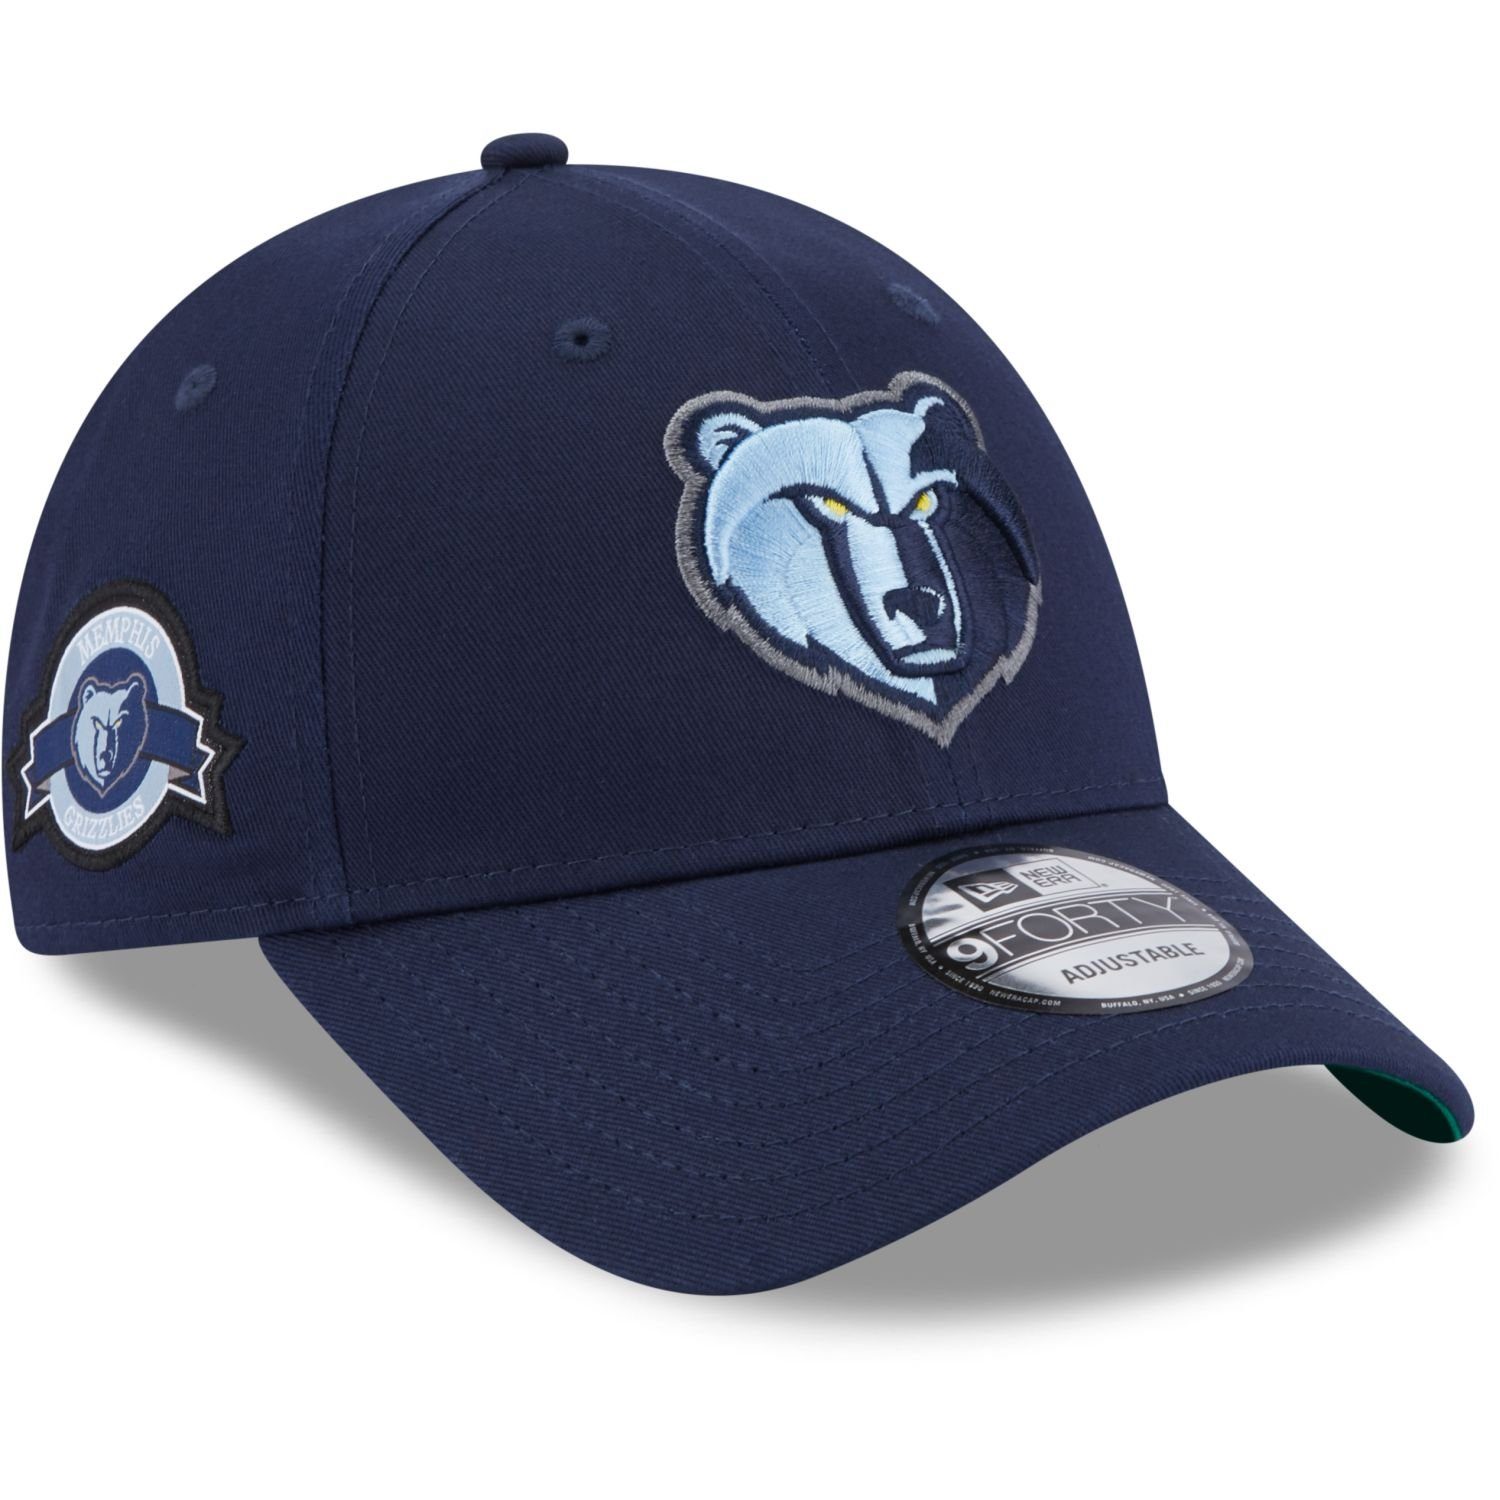 New Era Baseball Cap 9Forty Strapback SIDE PATCH Memphis Grizzlies